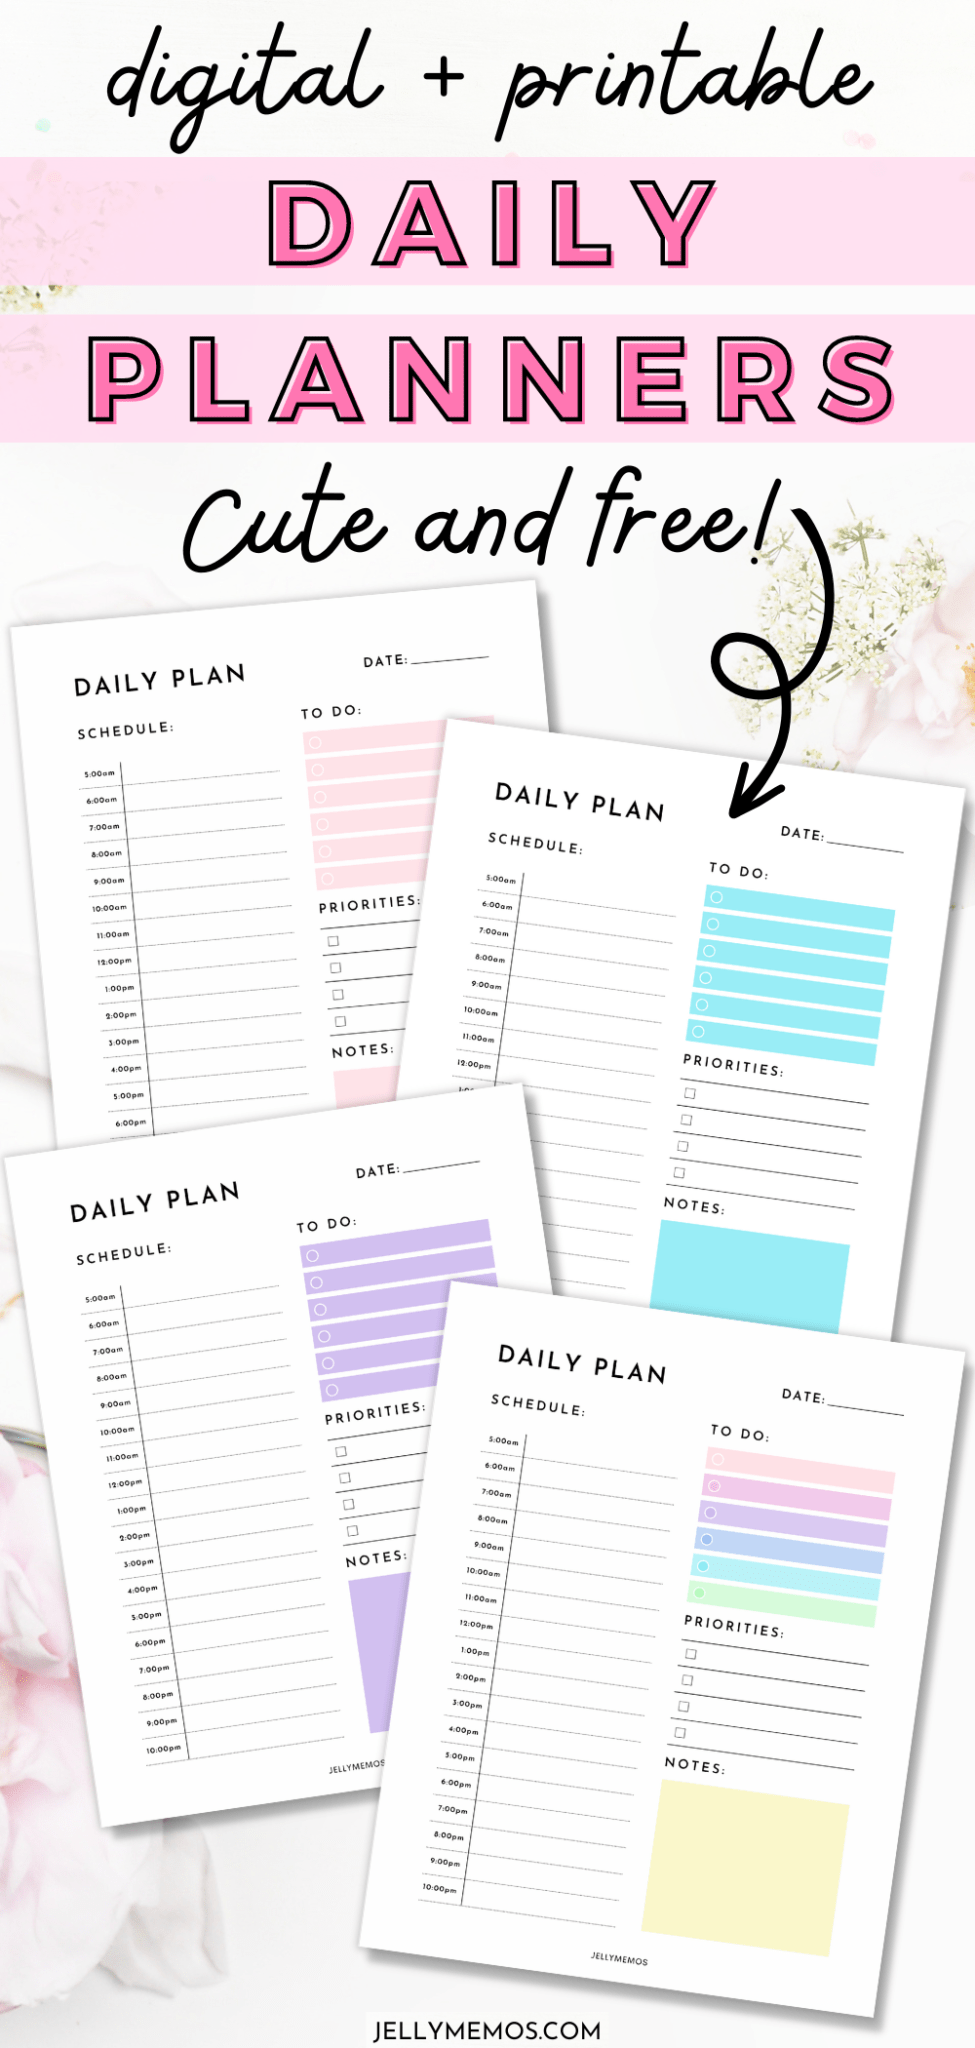 10 Cute Printable Daily Planners With Time Slots! - JellyMemos